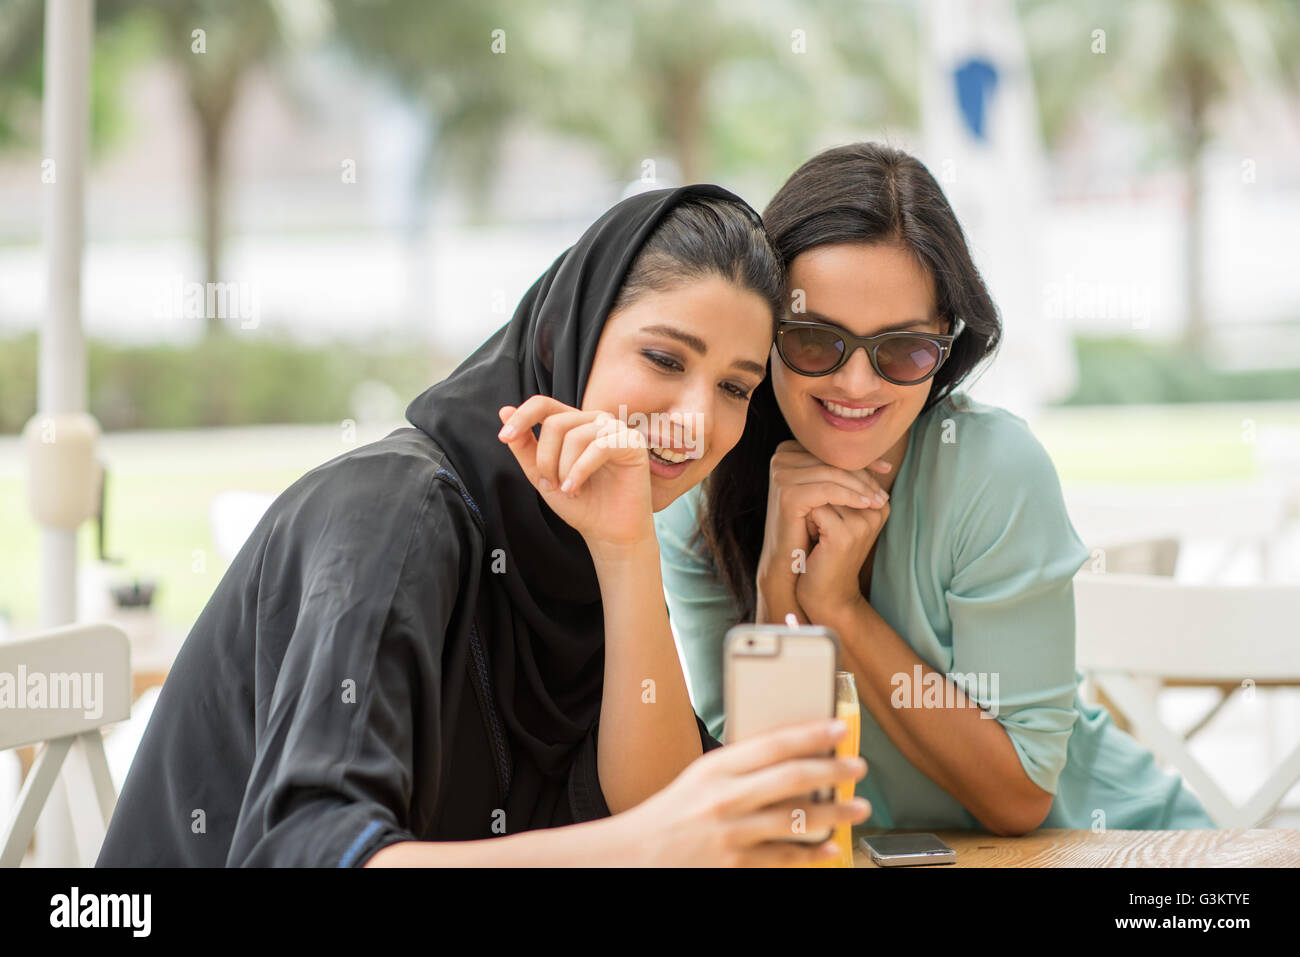 Young middle eastern woman wearing traditional clothing reading smartphone text with female friend at cafe, Dubai, United Arab Emirates Stock Photo